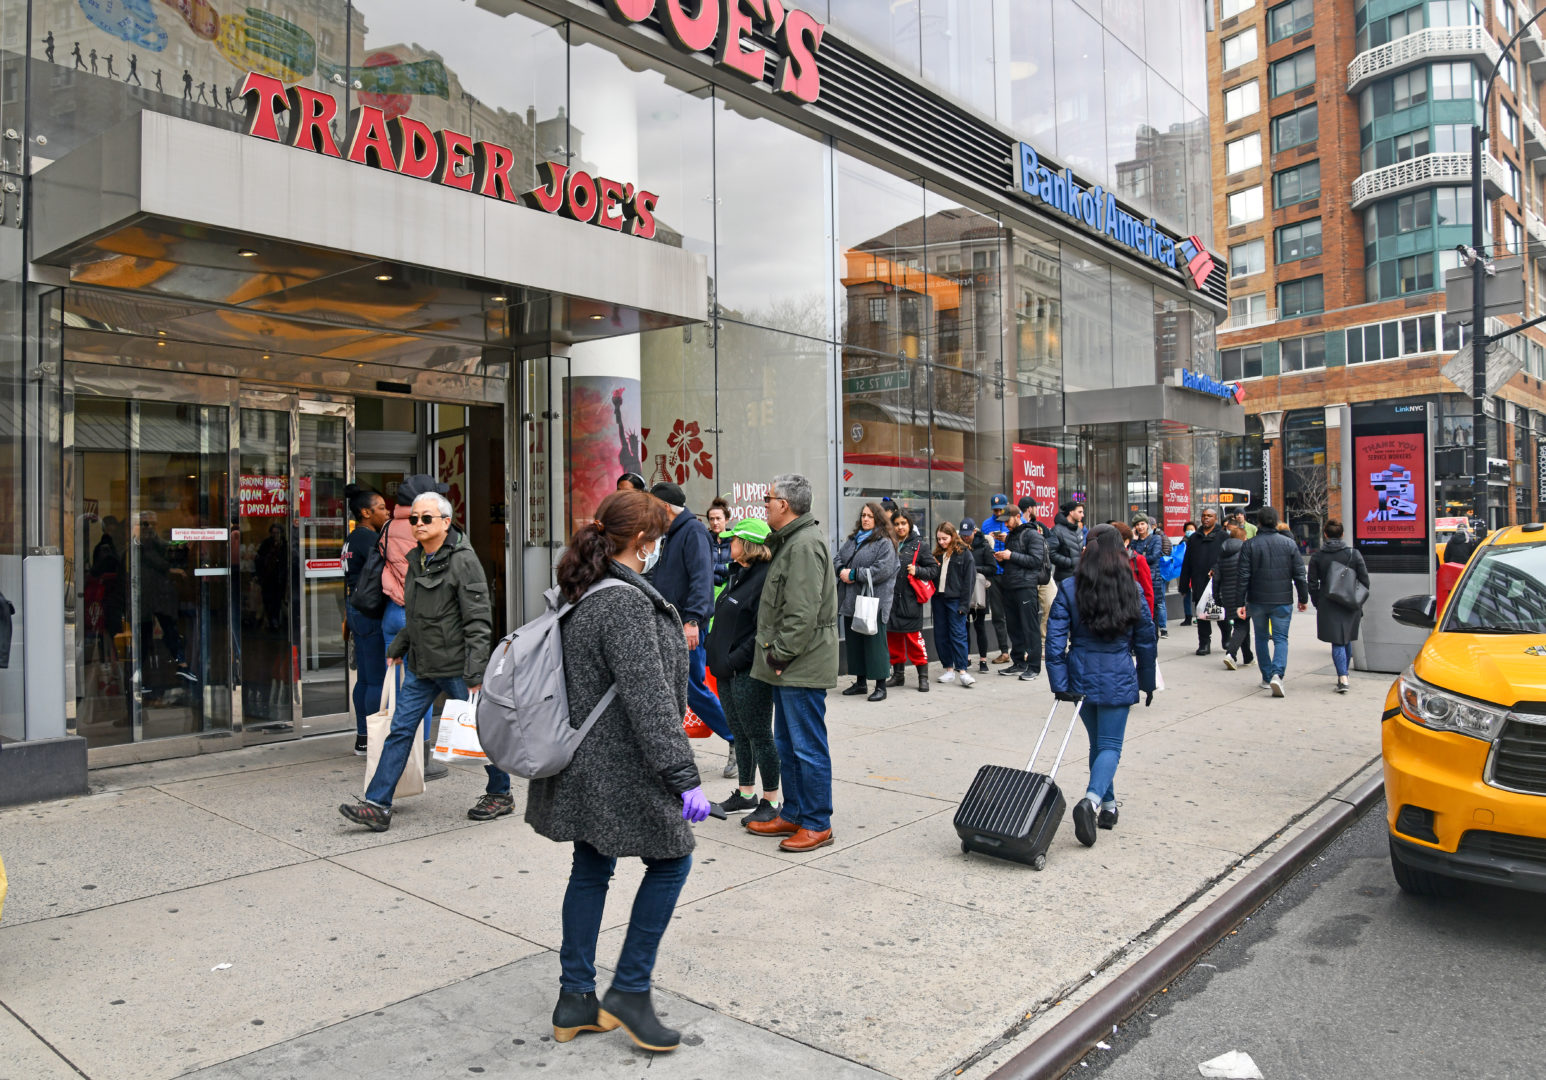 NEW YORK CITY CIRCA MARCH 2020. As the coronavirus pandemic broadens in scope, grocery stores such as Trader Joe’s are seeing long lines of people stocking up on food and provisions